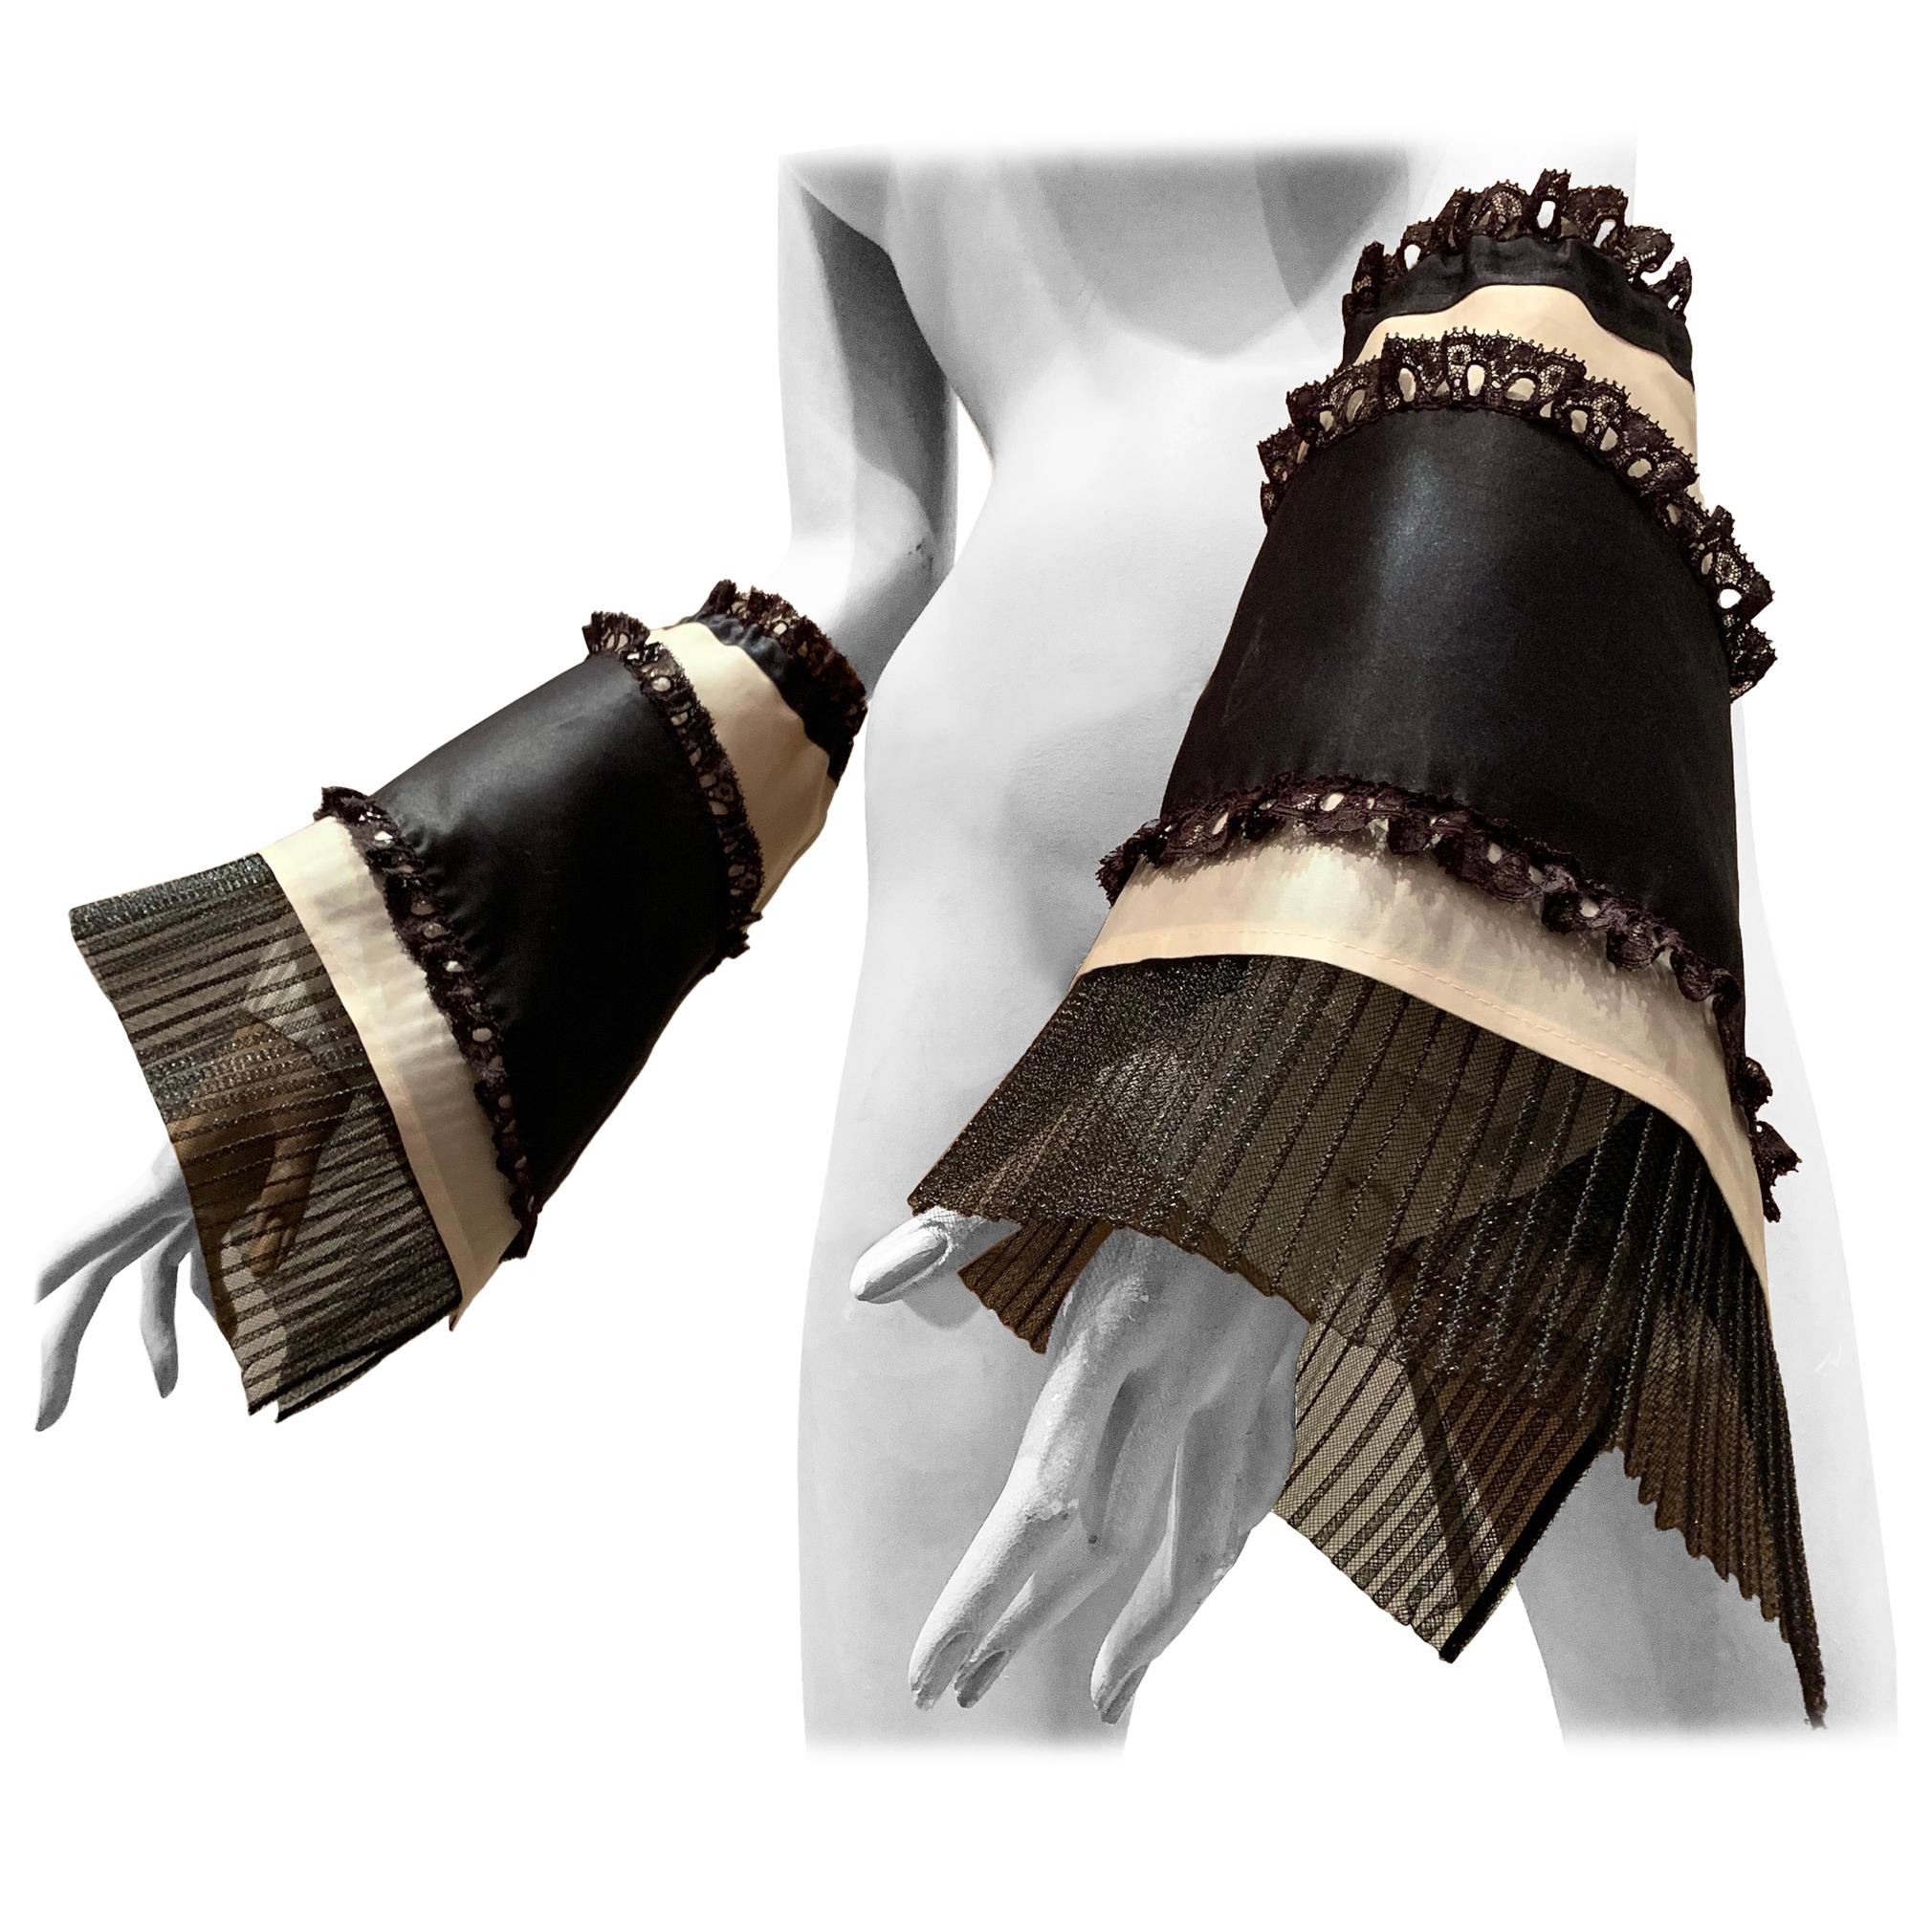 Torso Creations Black & White Shirt-Sleeve Gauntlets W/ Organza Ruffles & Lace For Sale